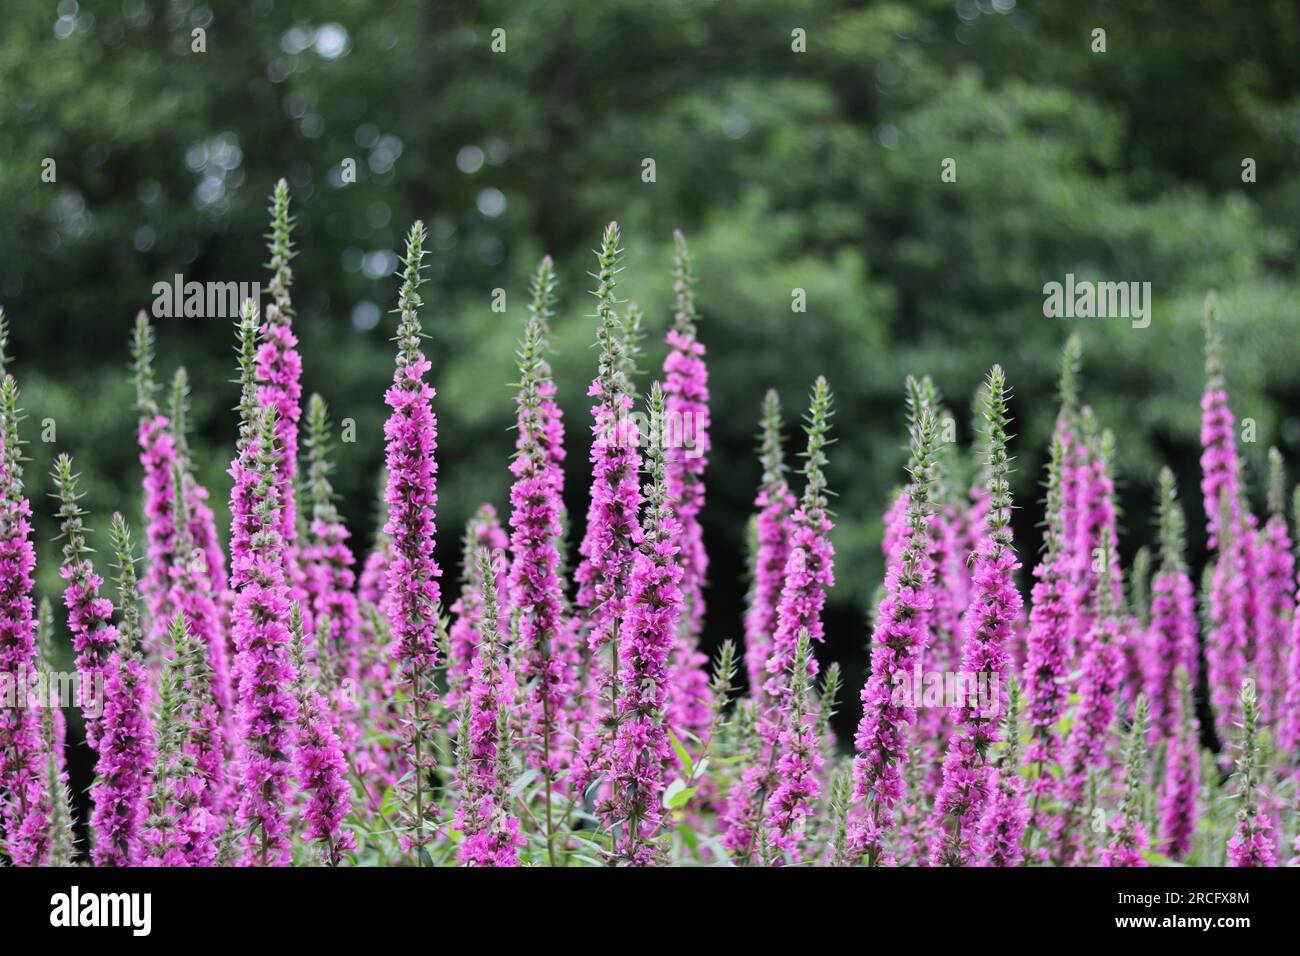 Beautiful pink veronica flowers in garden with blurred bushes in background Stock Photo